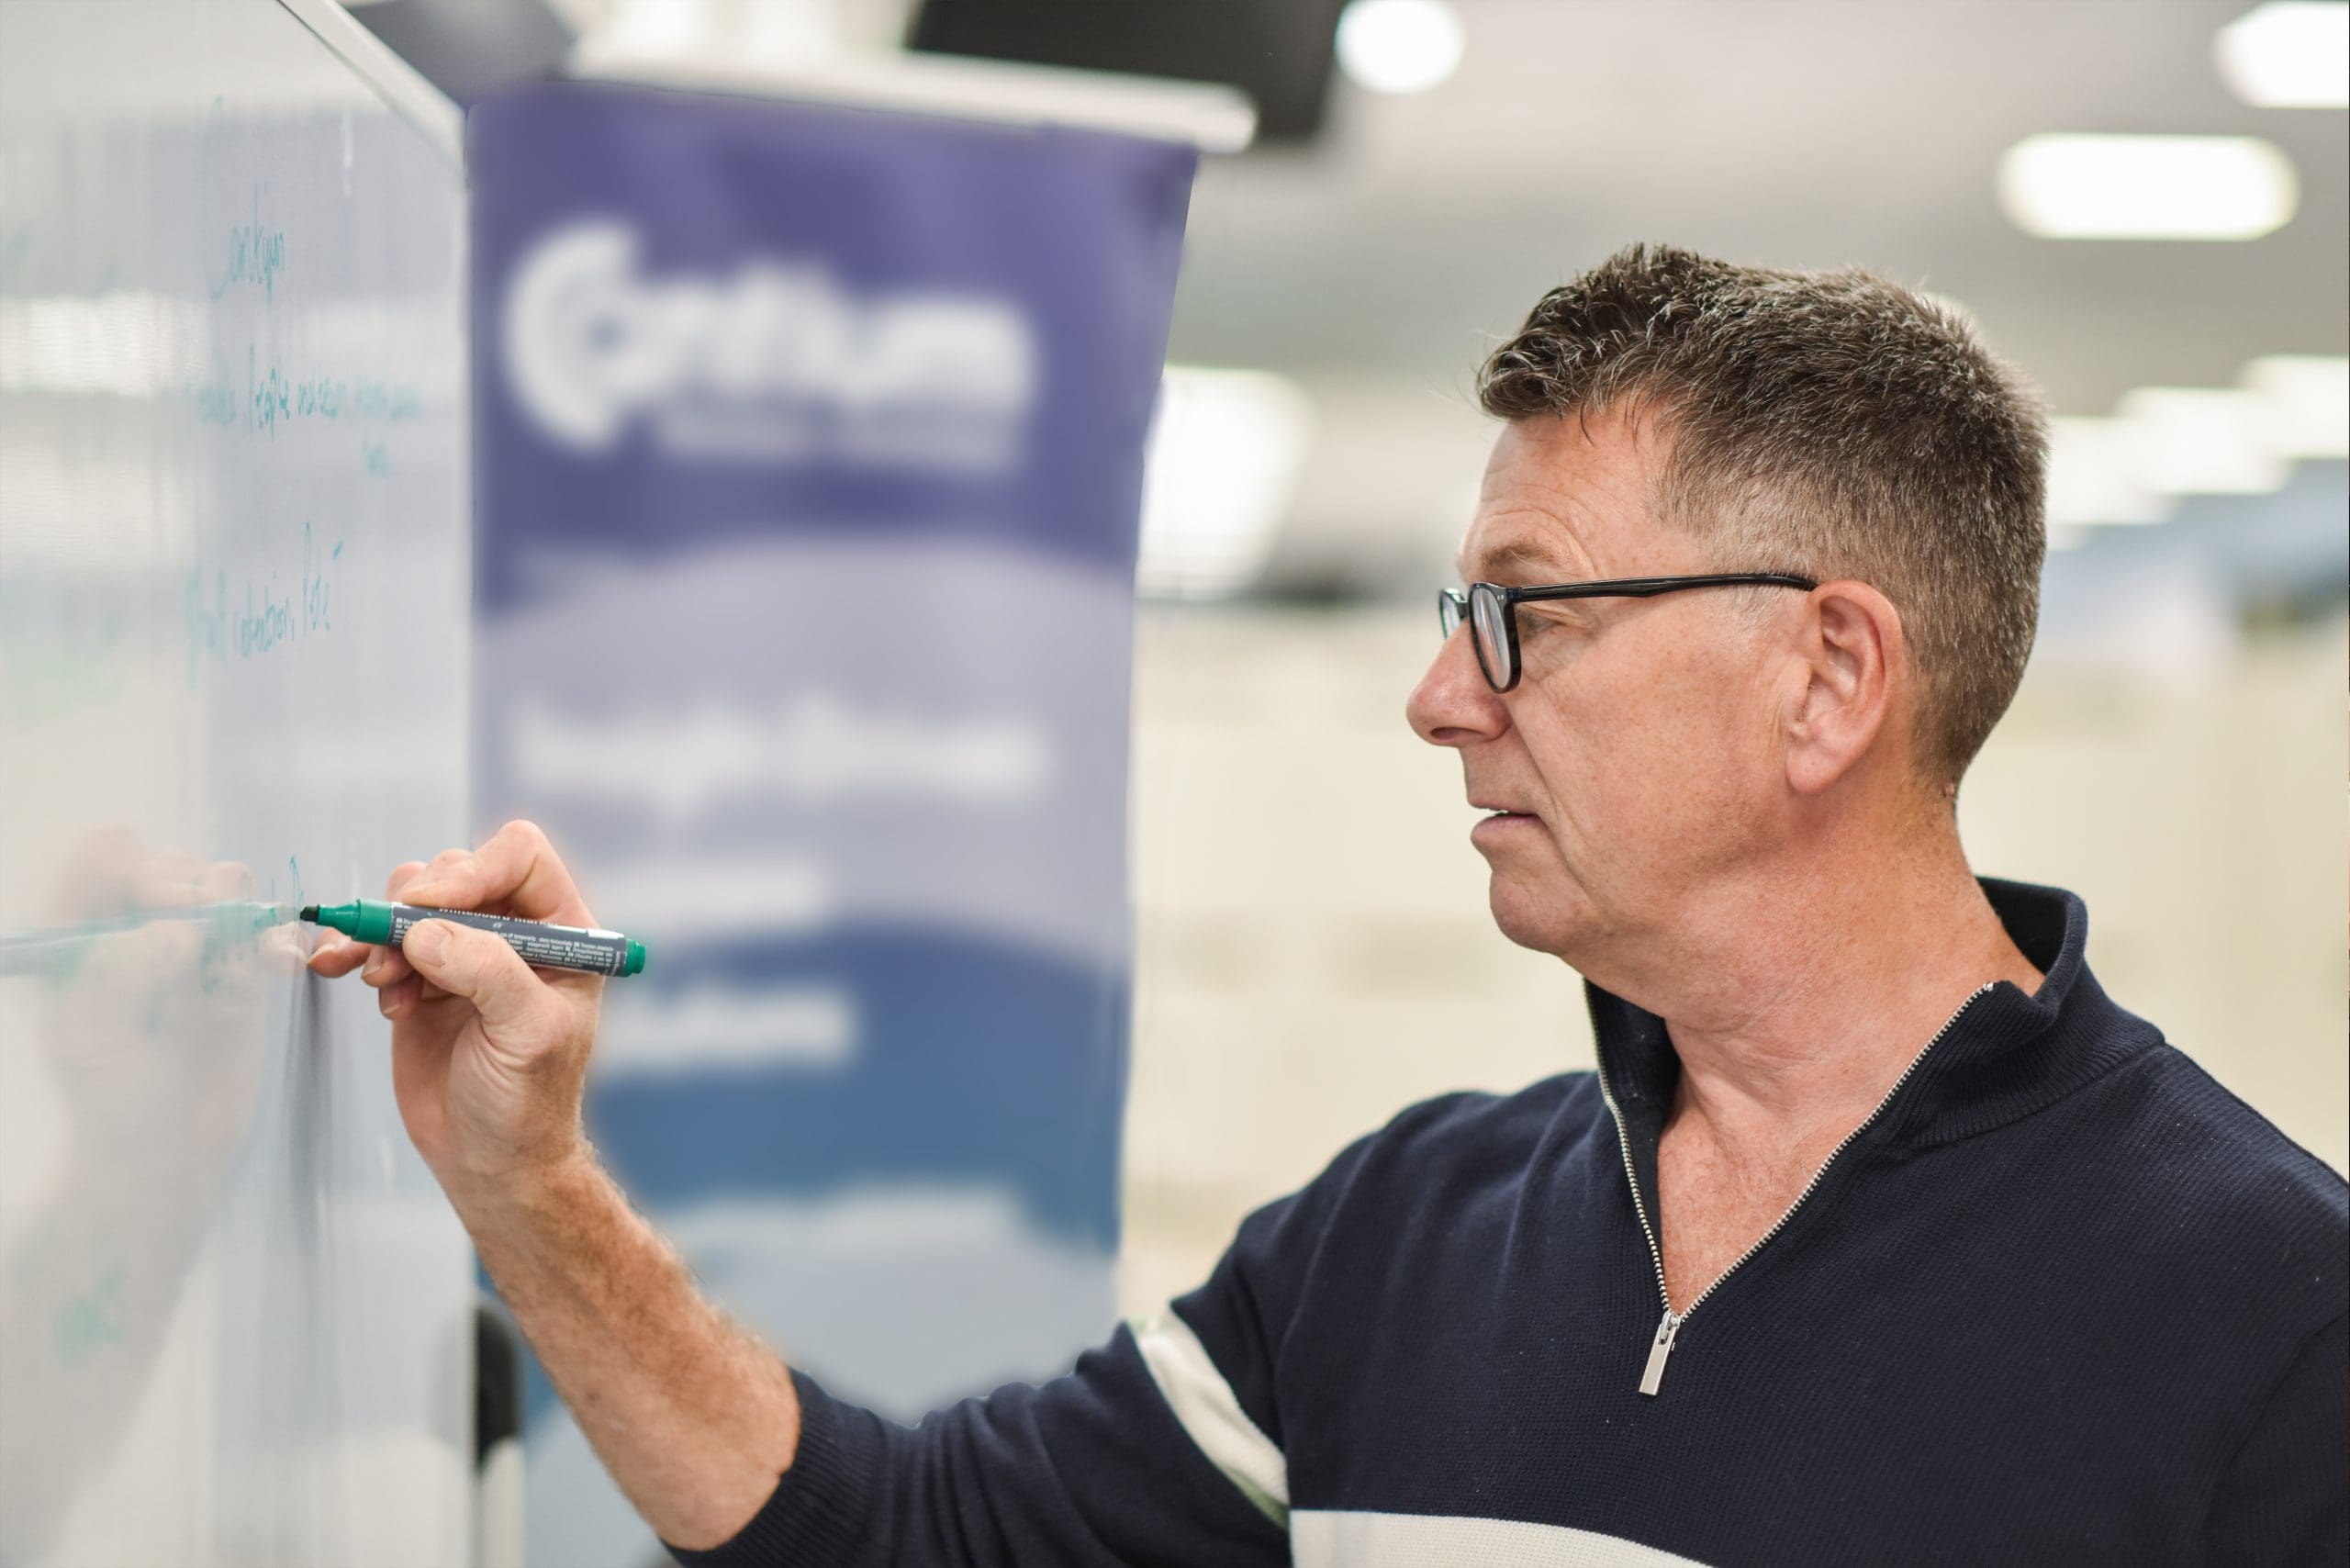 Cantium employee facing a whiteboard and writing text using a pen. Text cannot be seen.